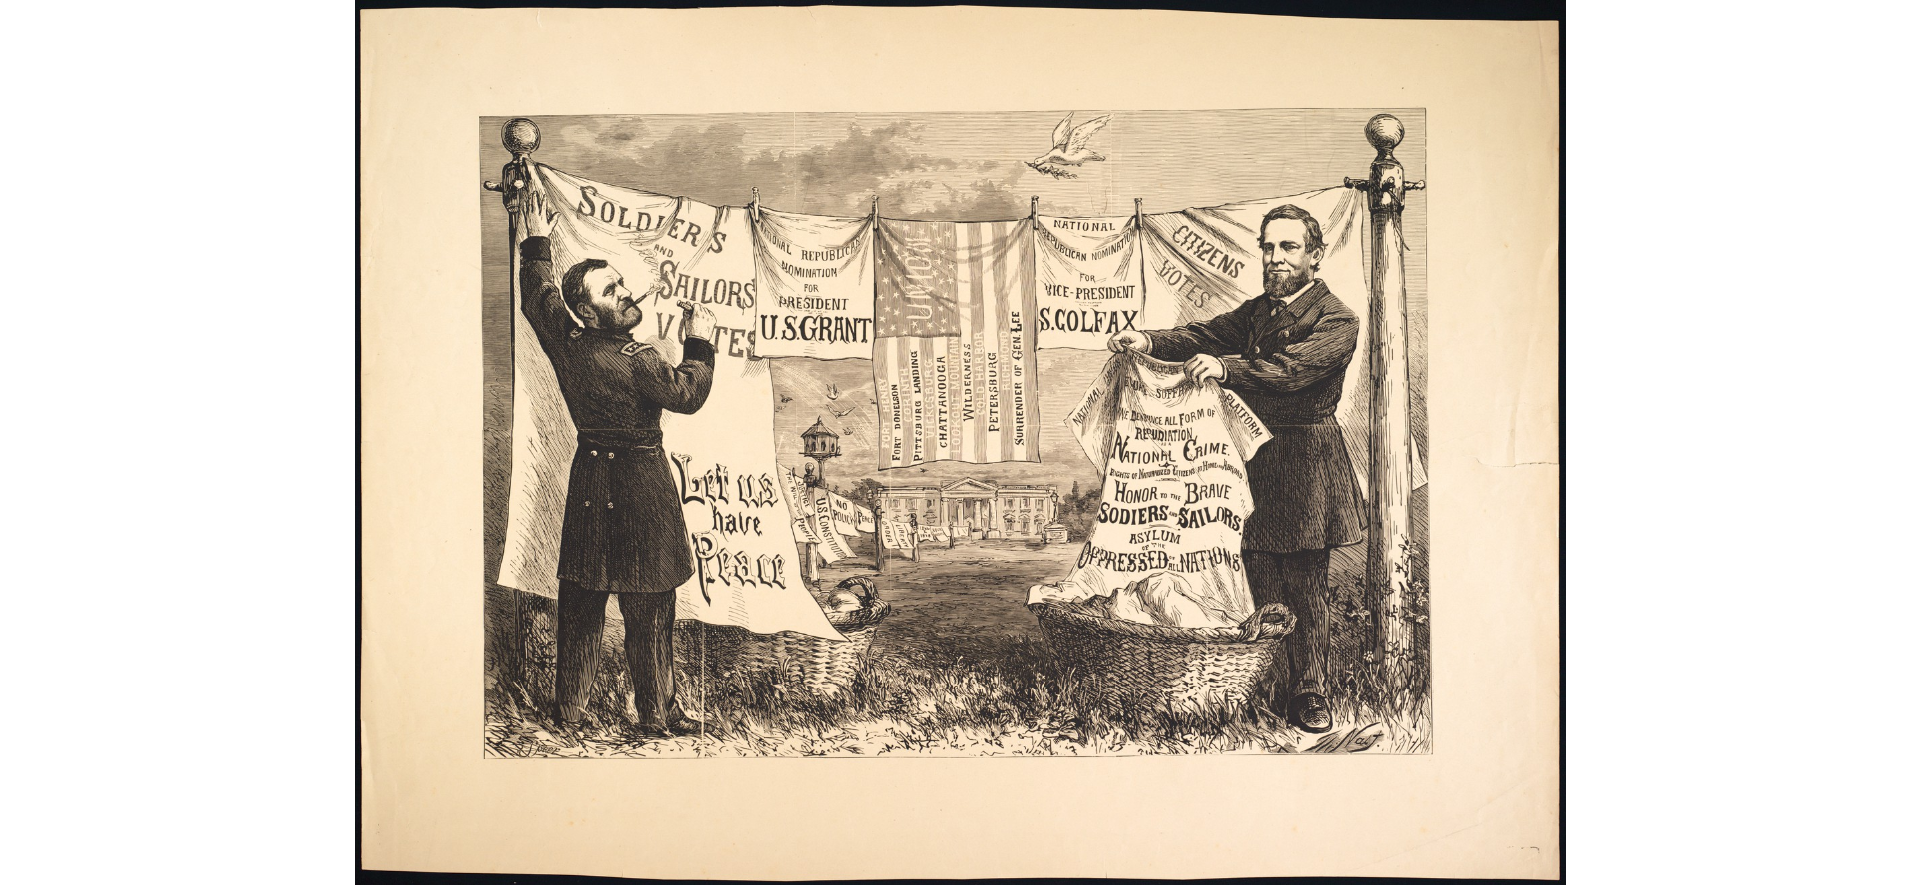 Two bearded men hanging laundry promoting the candidacy of Ulysses S. Grant as president in 1868.